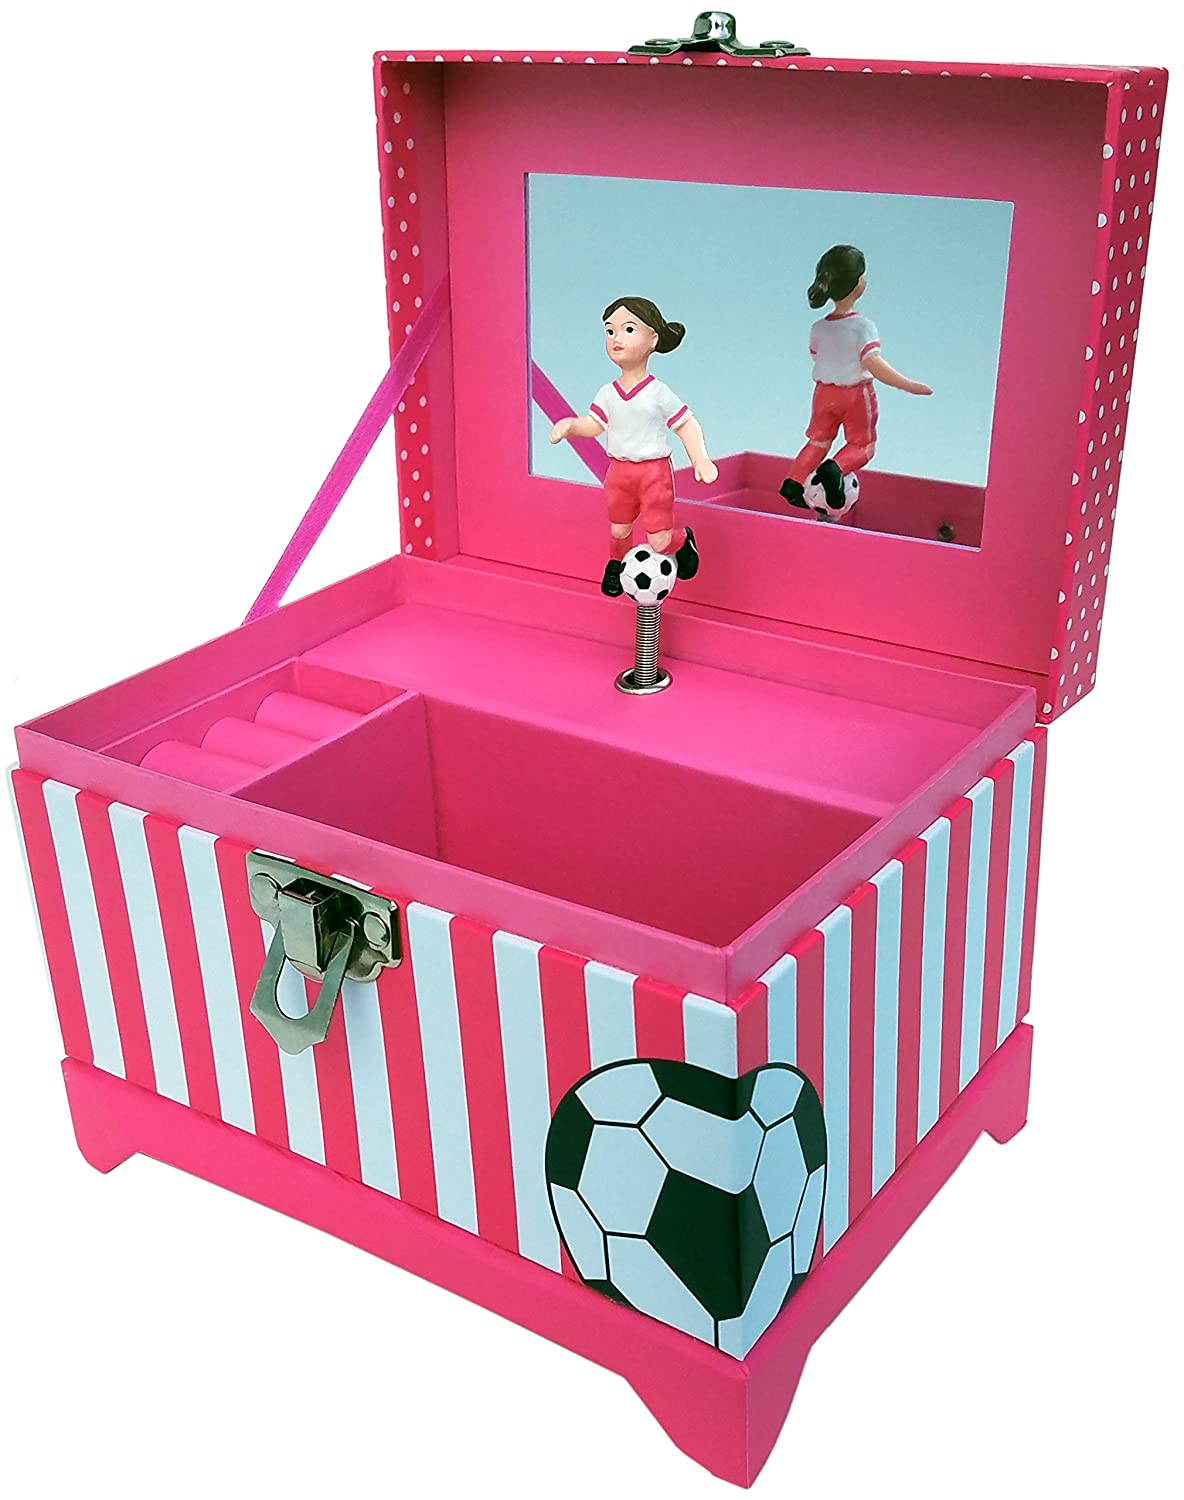 Just Like Me Soccer Player Musical Jewelry Box (Brown Hair Figurine)